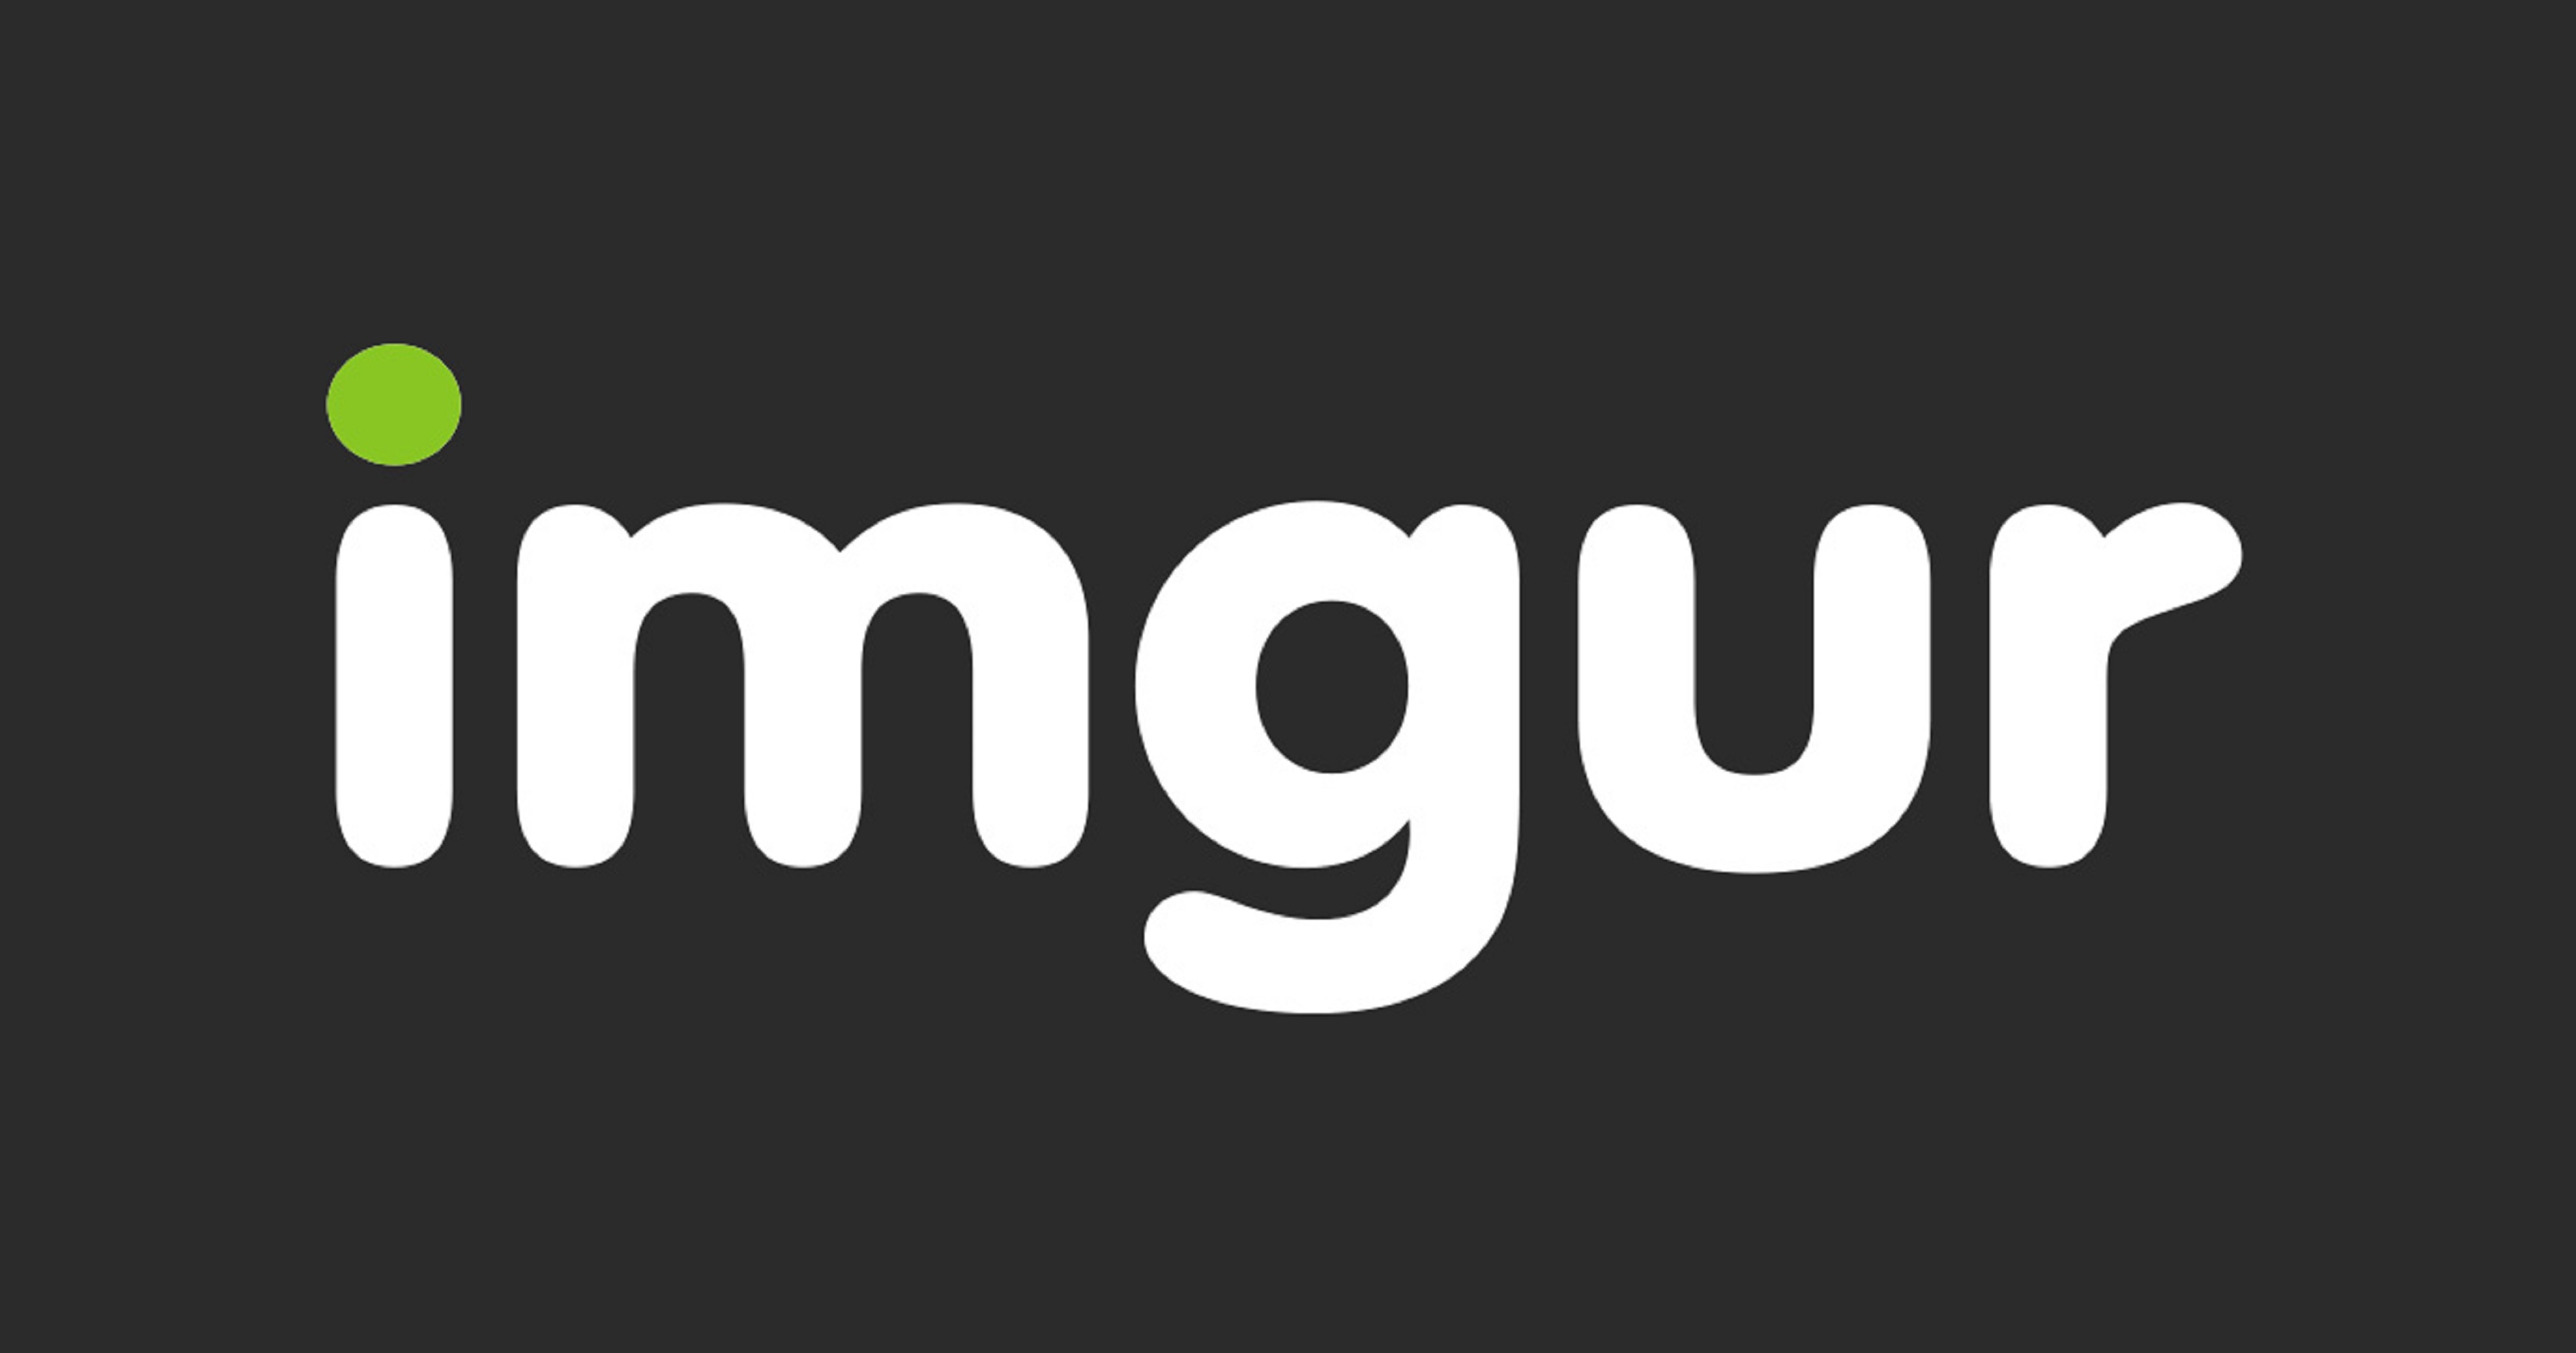 Imgur is Deleting All Old Content Not Tied to an Account - Find Out if This Affects You.